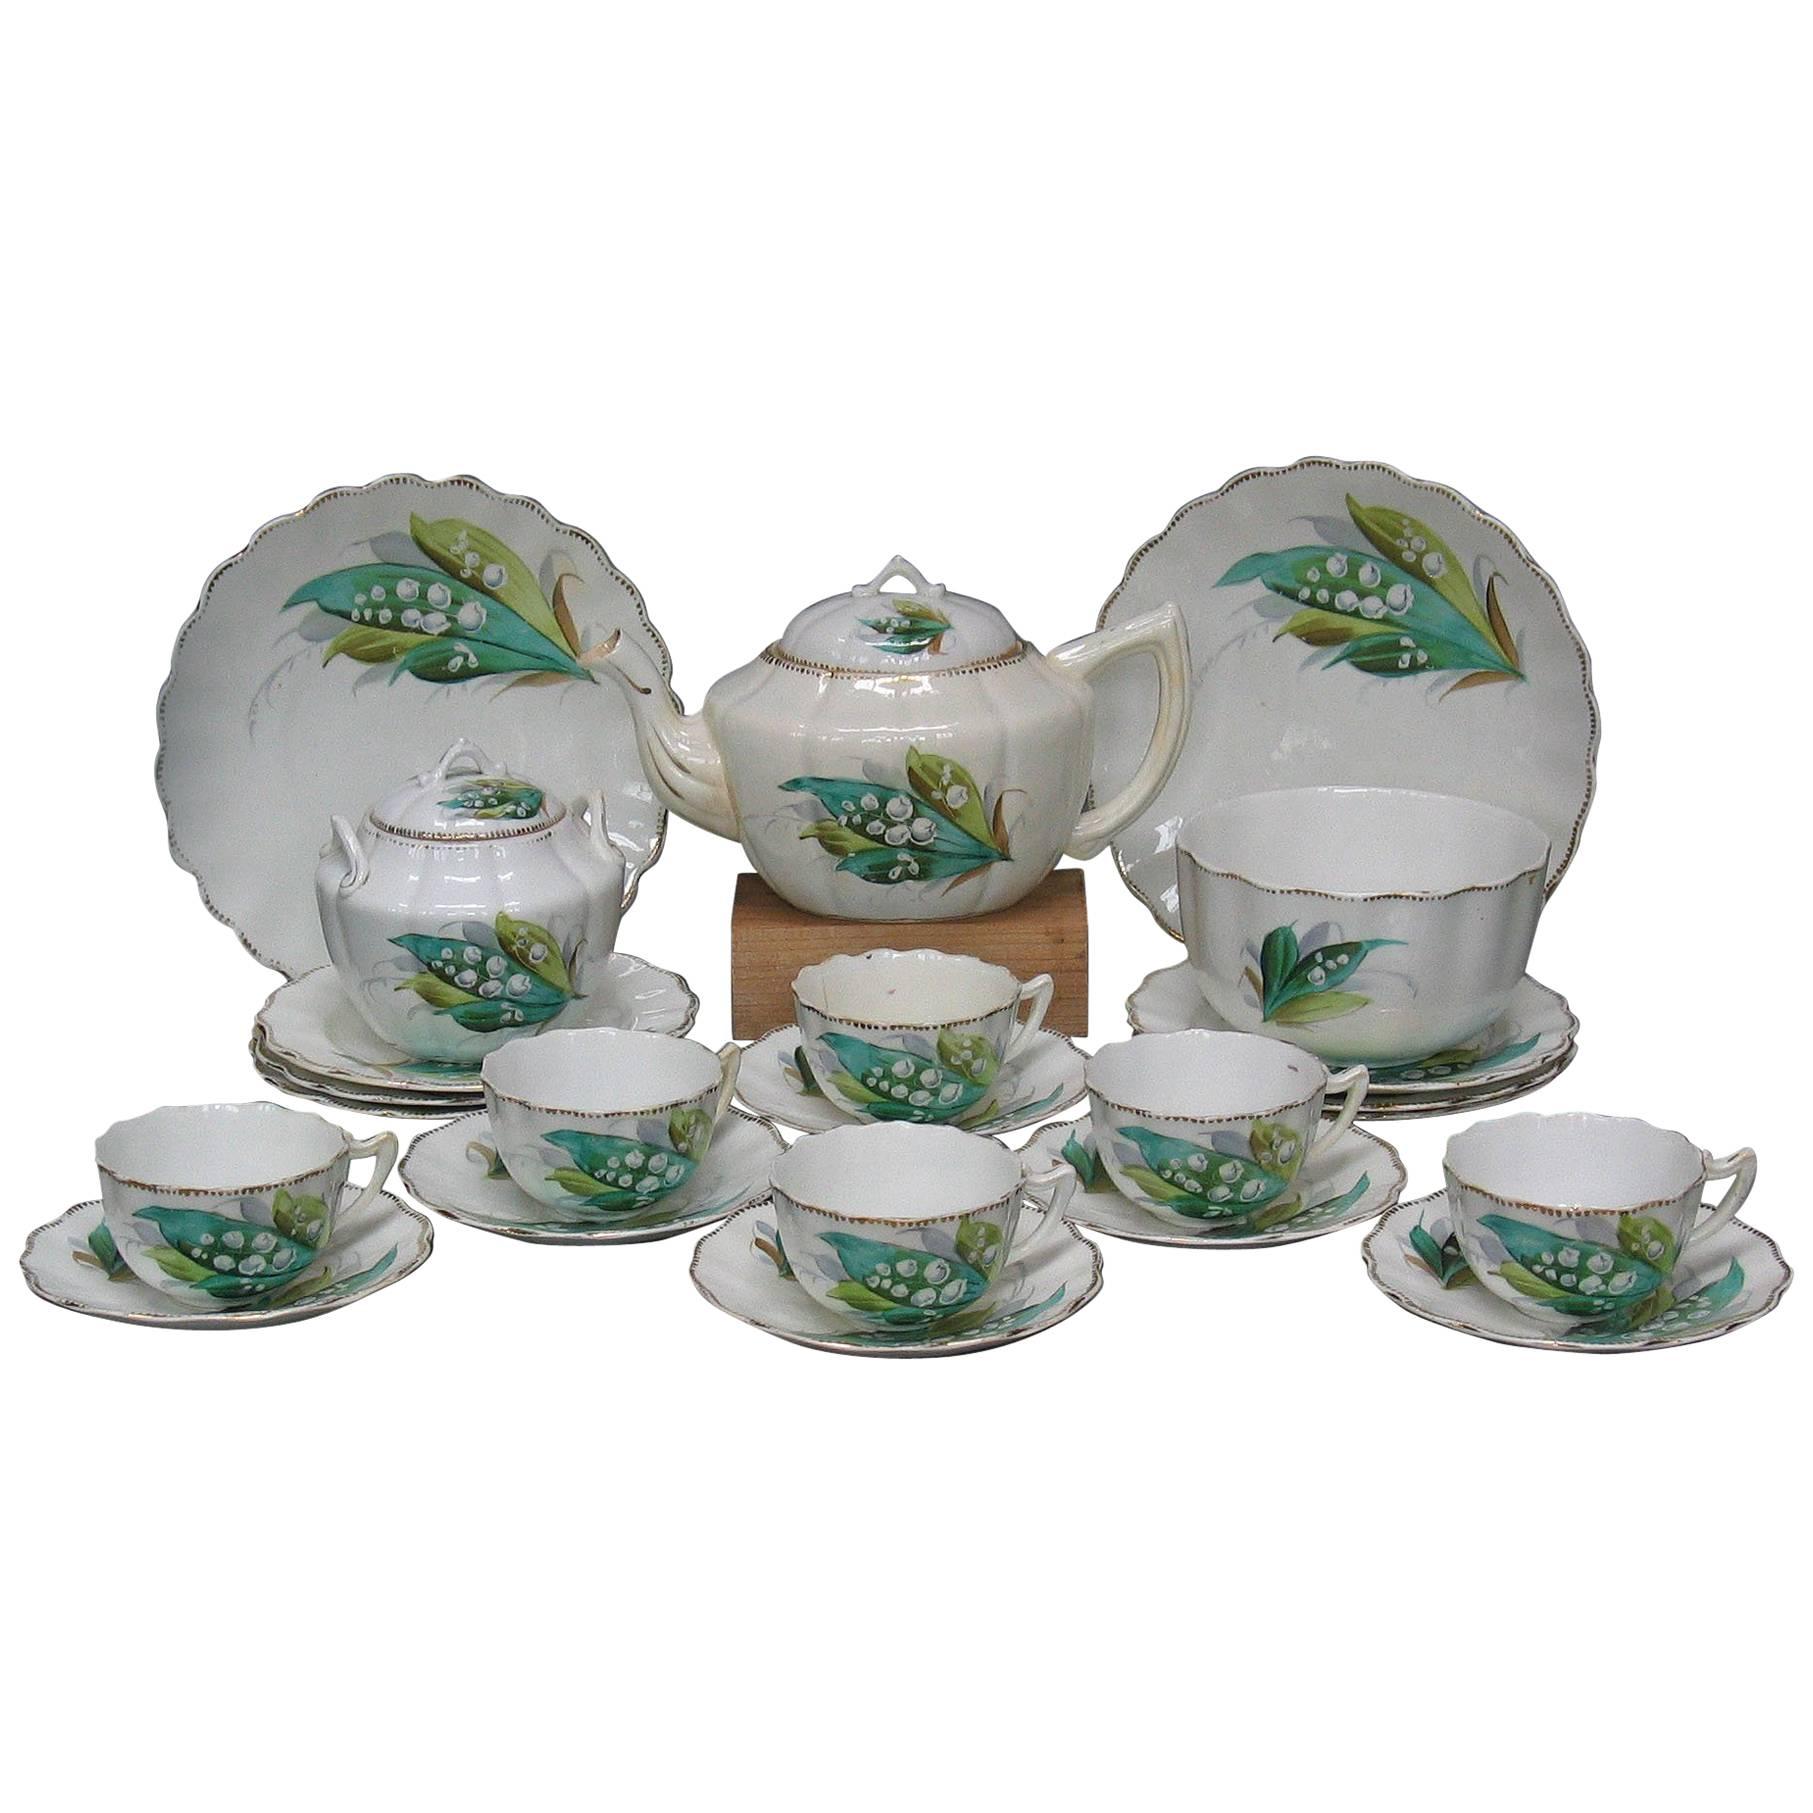 Staffordshire Porcelain Part Tea and Dessert Service, First Half of 19th Century